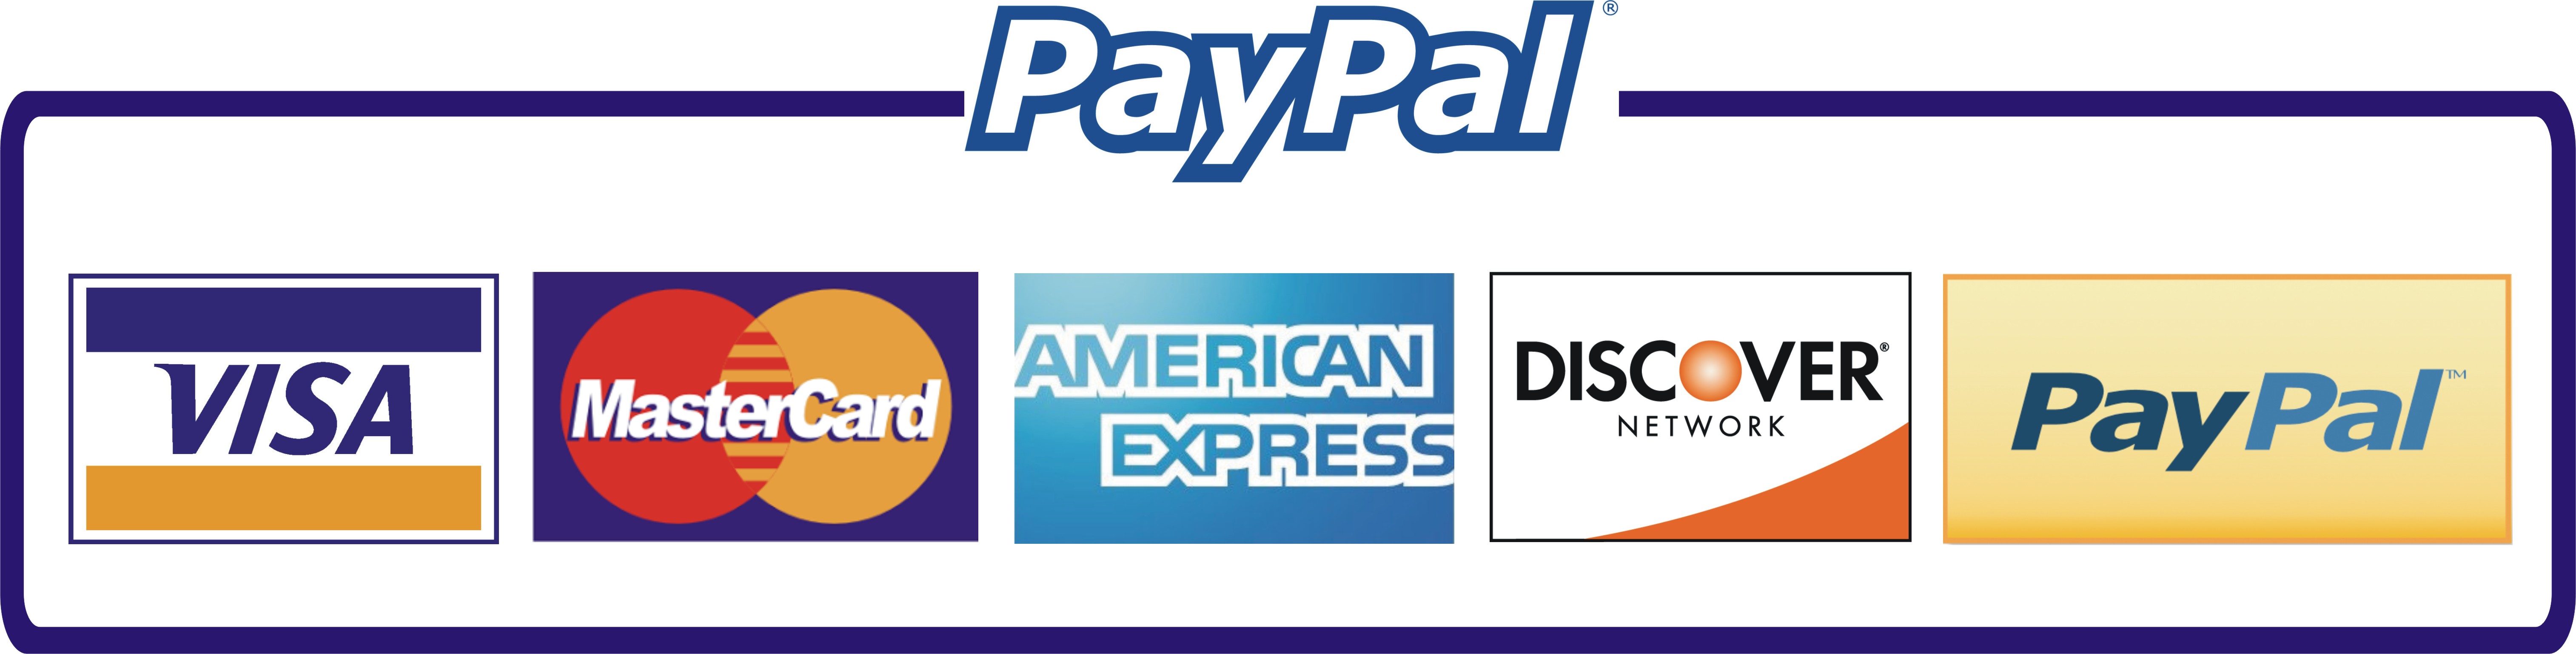 paypal_othercards_logo1